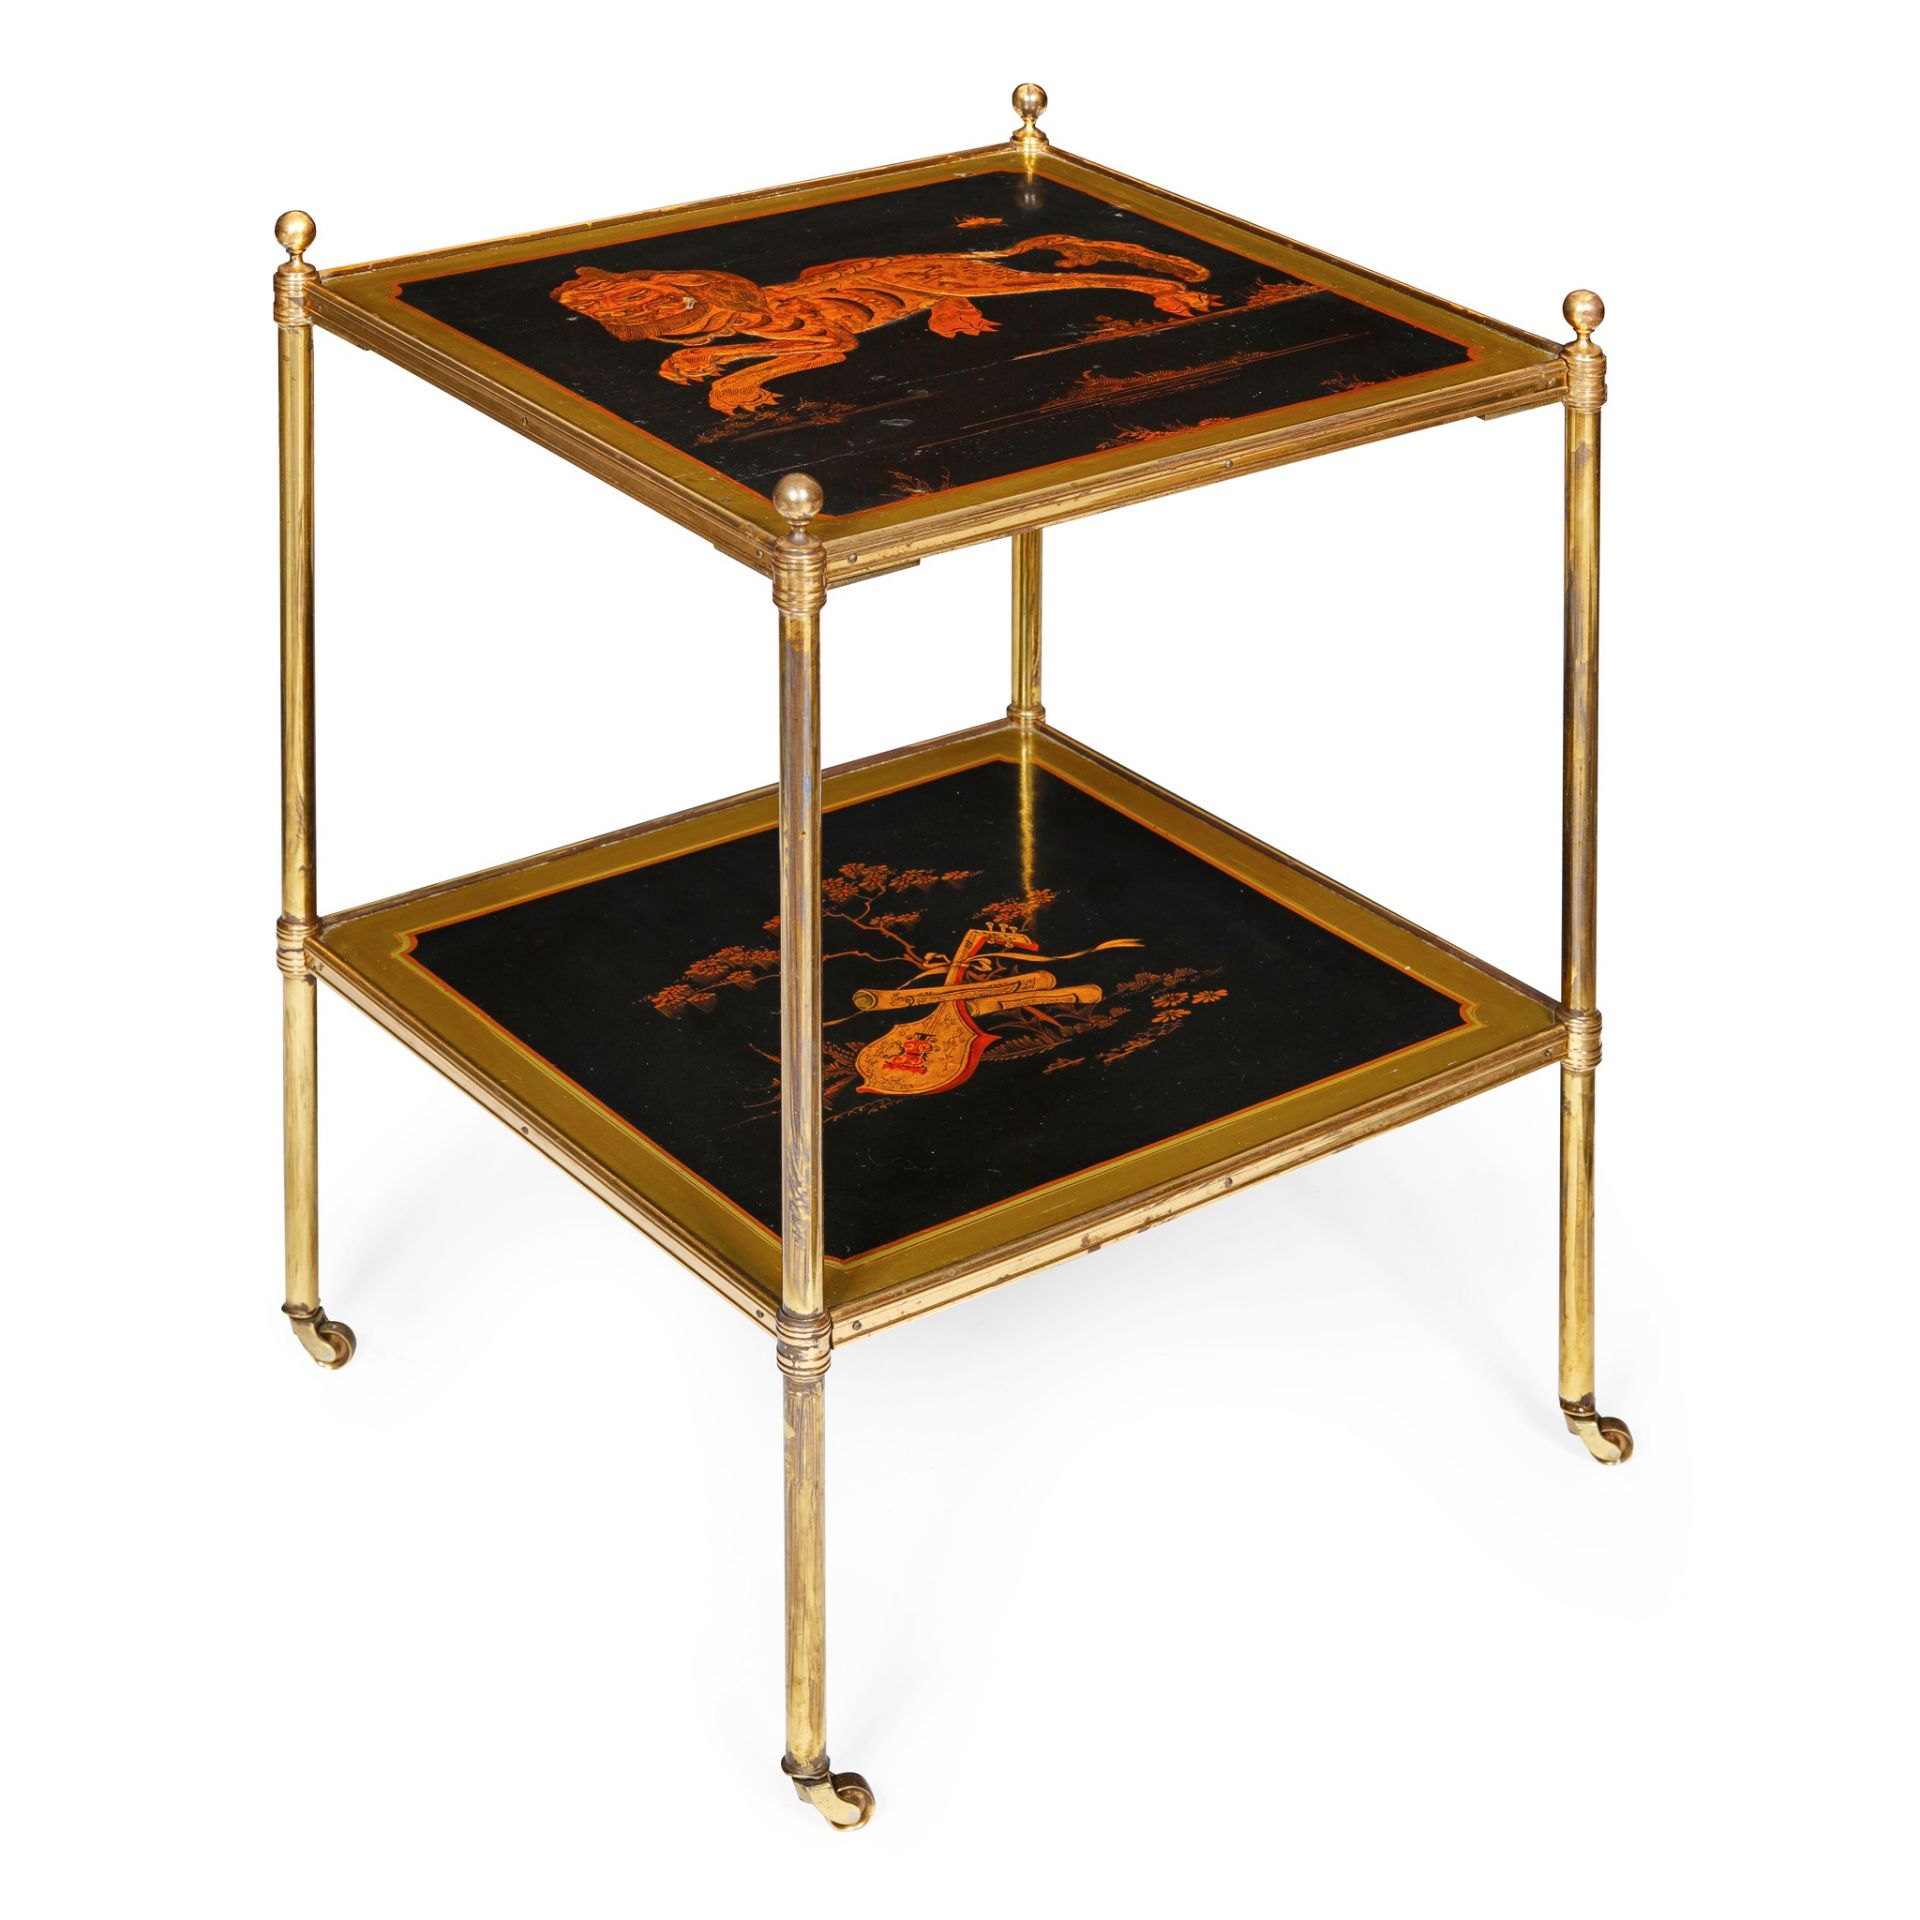 GILT BRASS FRAMED LACQUER ÉTAGÈRE EARLY 20TH CENTURY - Image 3 of 3